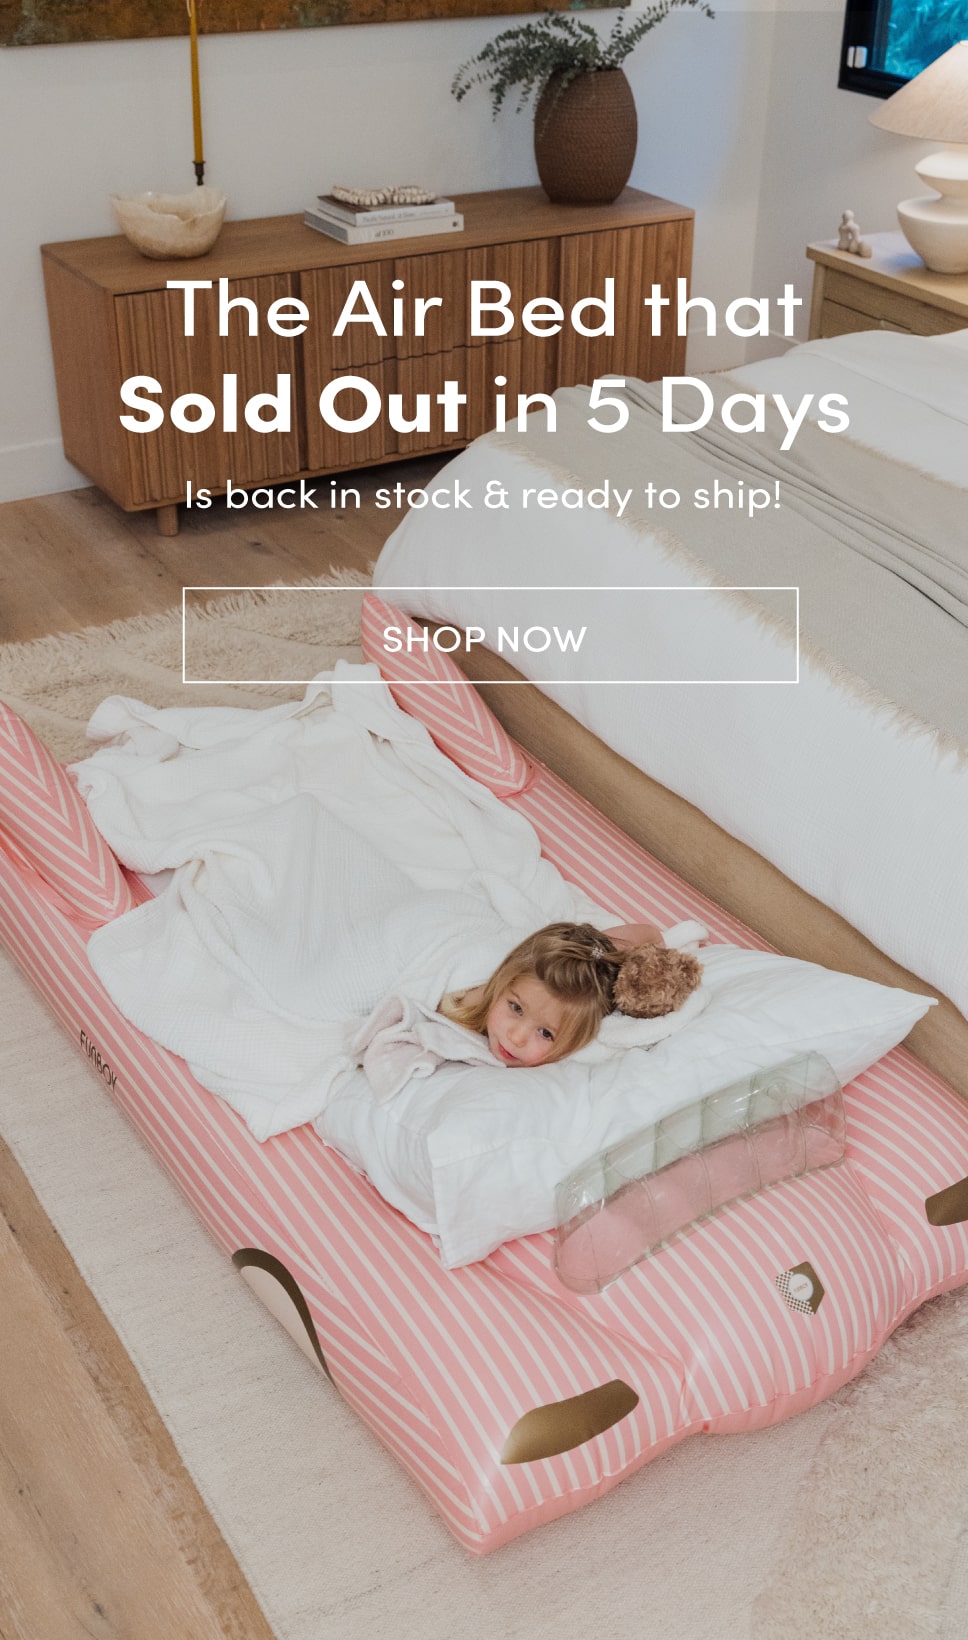 The air bed that sold out in 5 days is back in stock and ready to ship. SHOP NOW